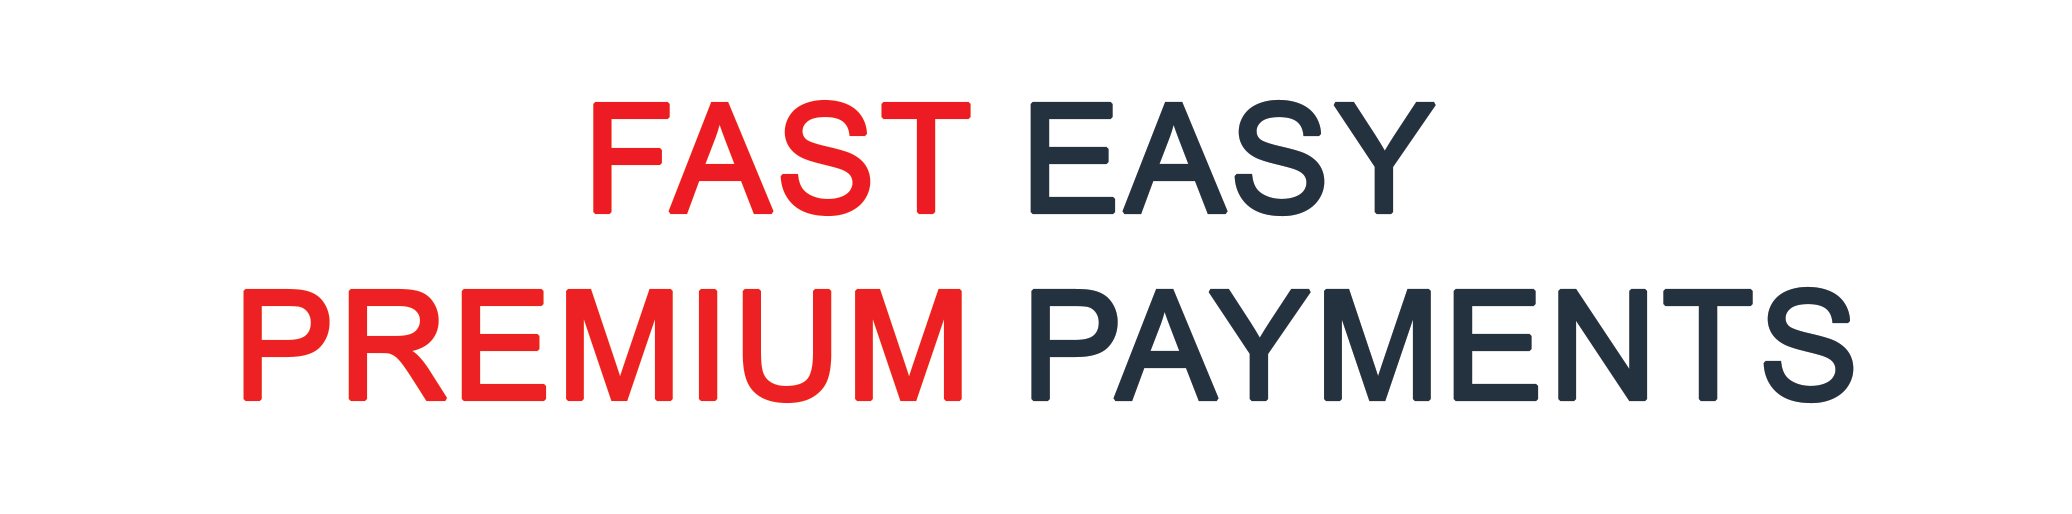 Fast Easy Payments Logo